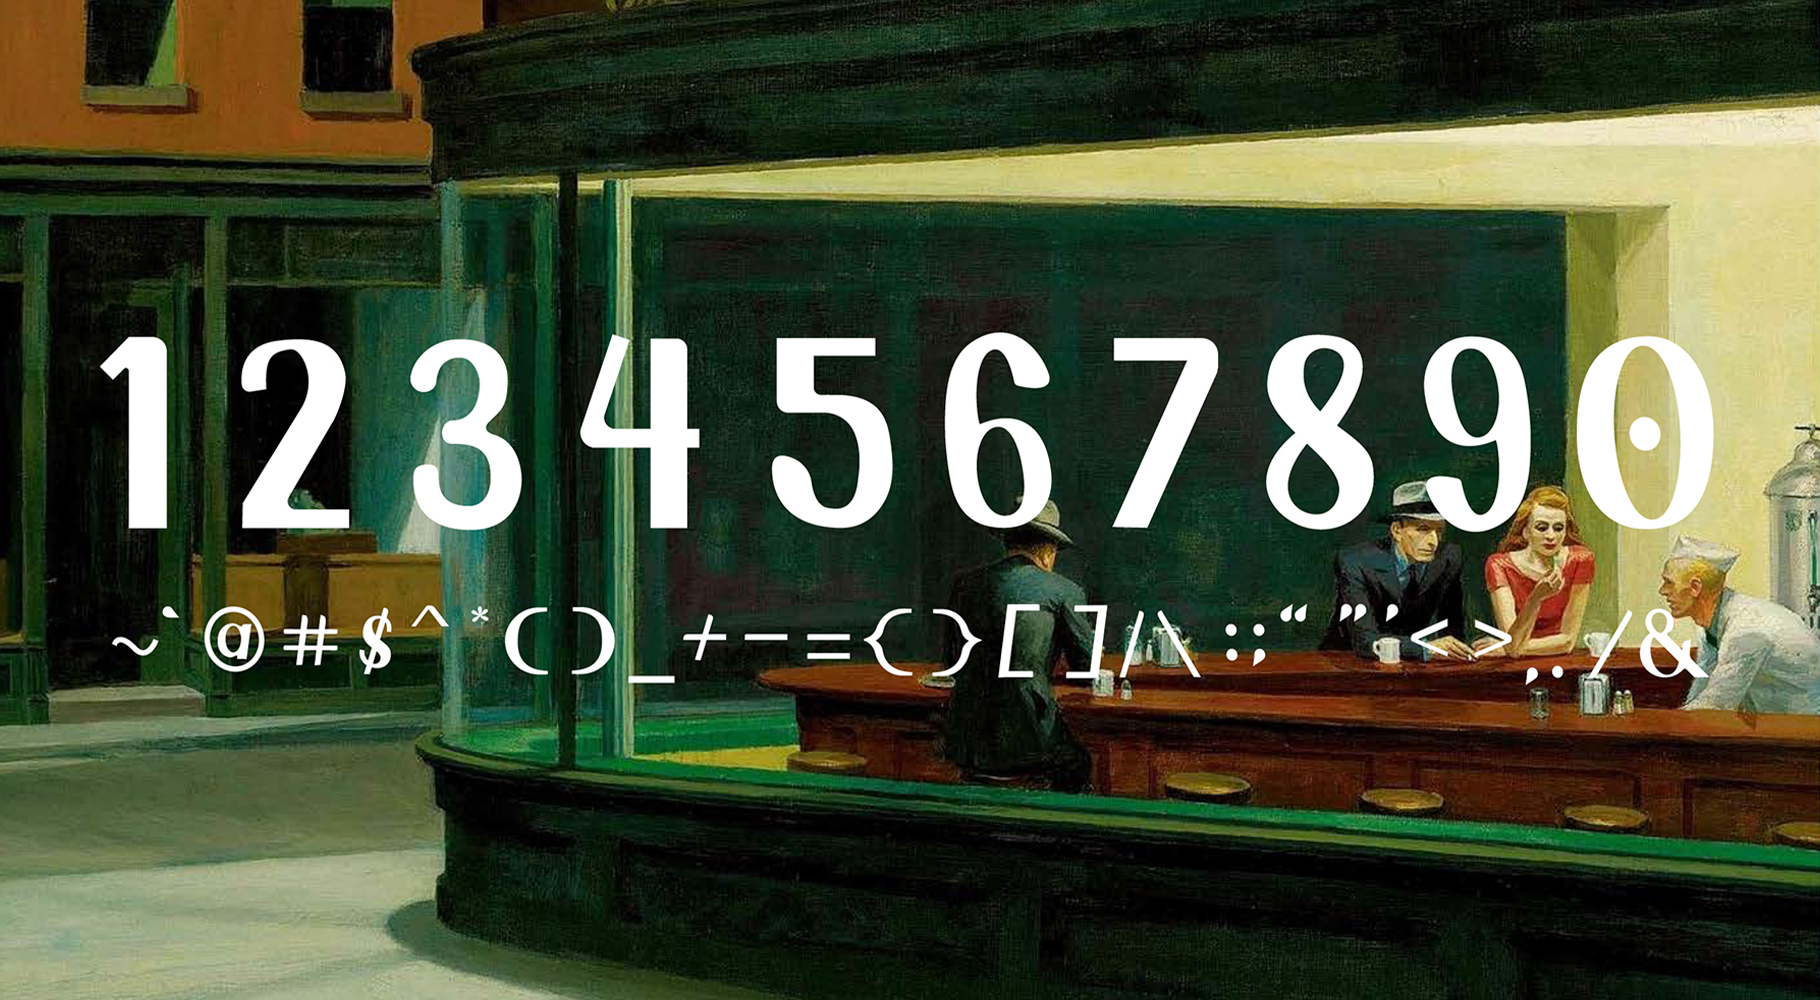 numbers and symbols in white, displayed on the painting Nighthawks by Edward Hopper